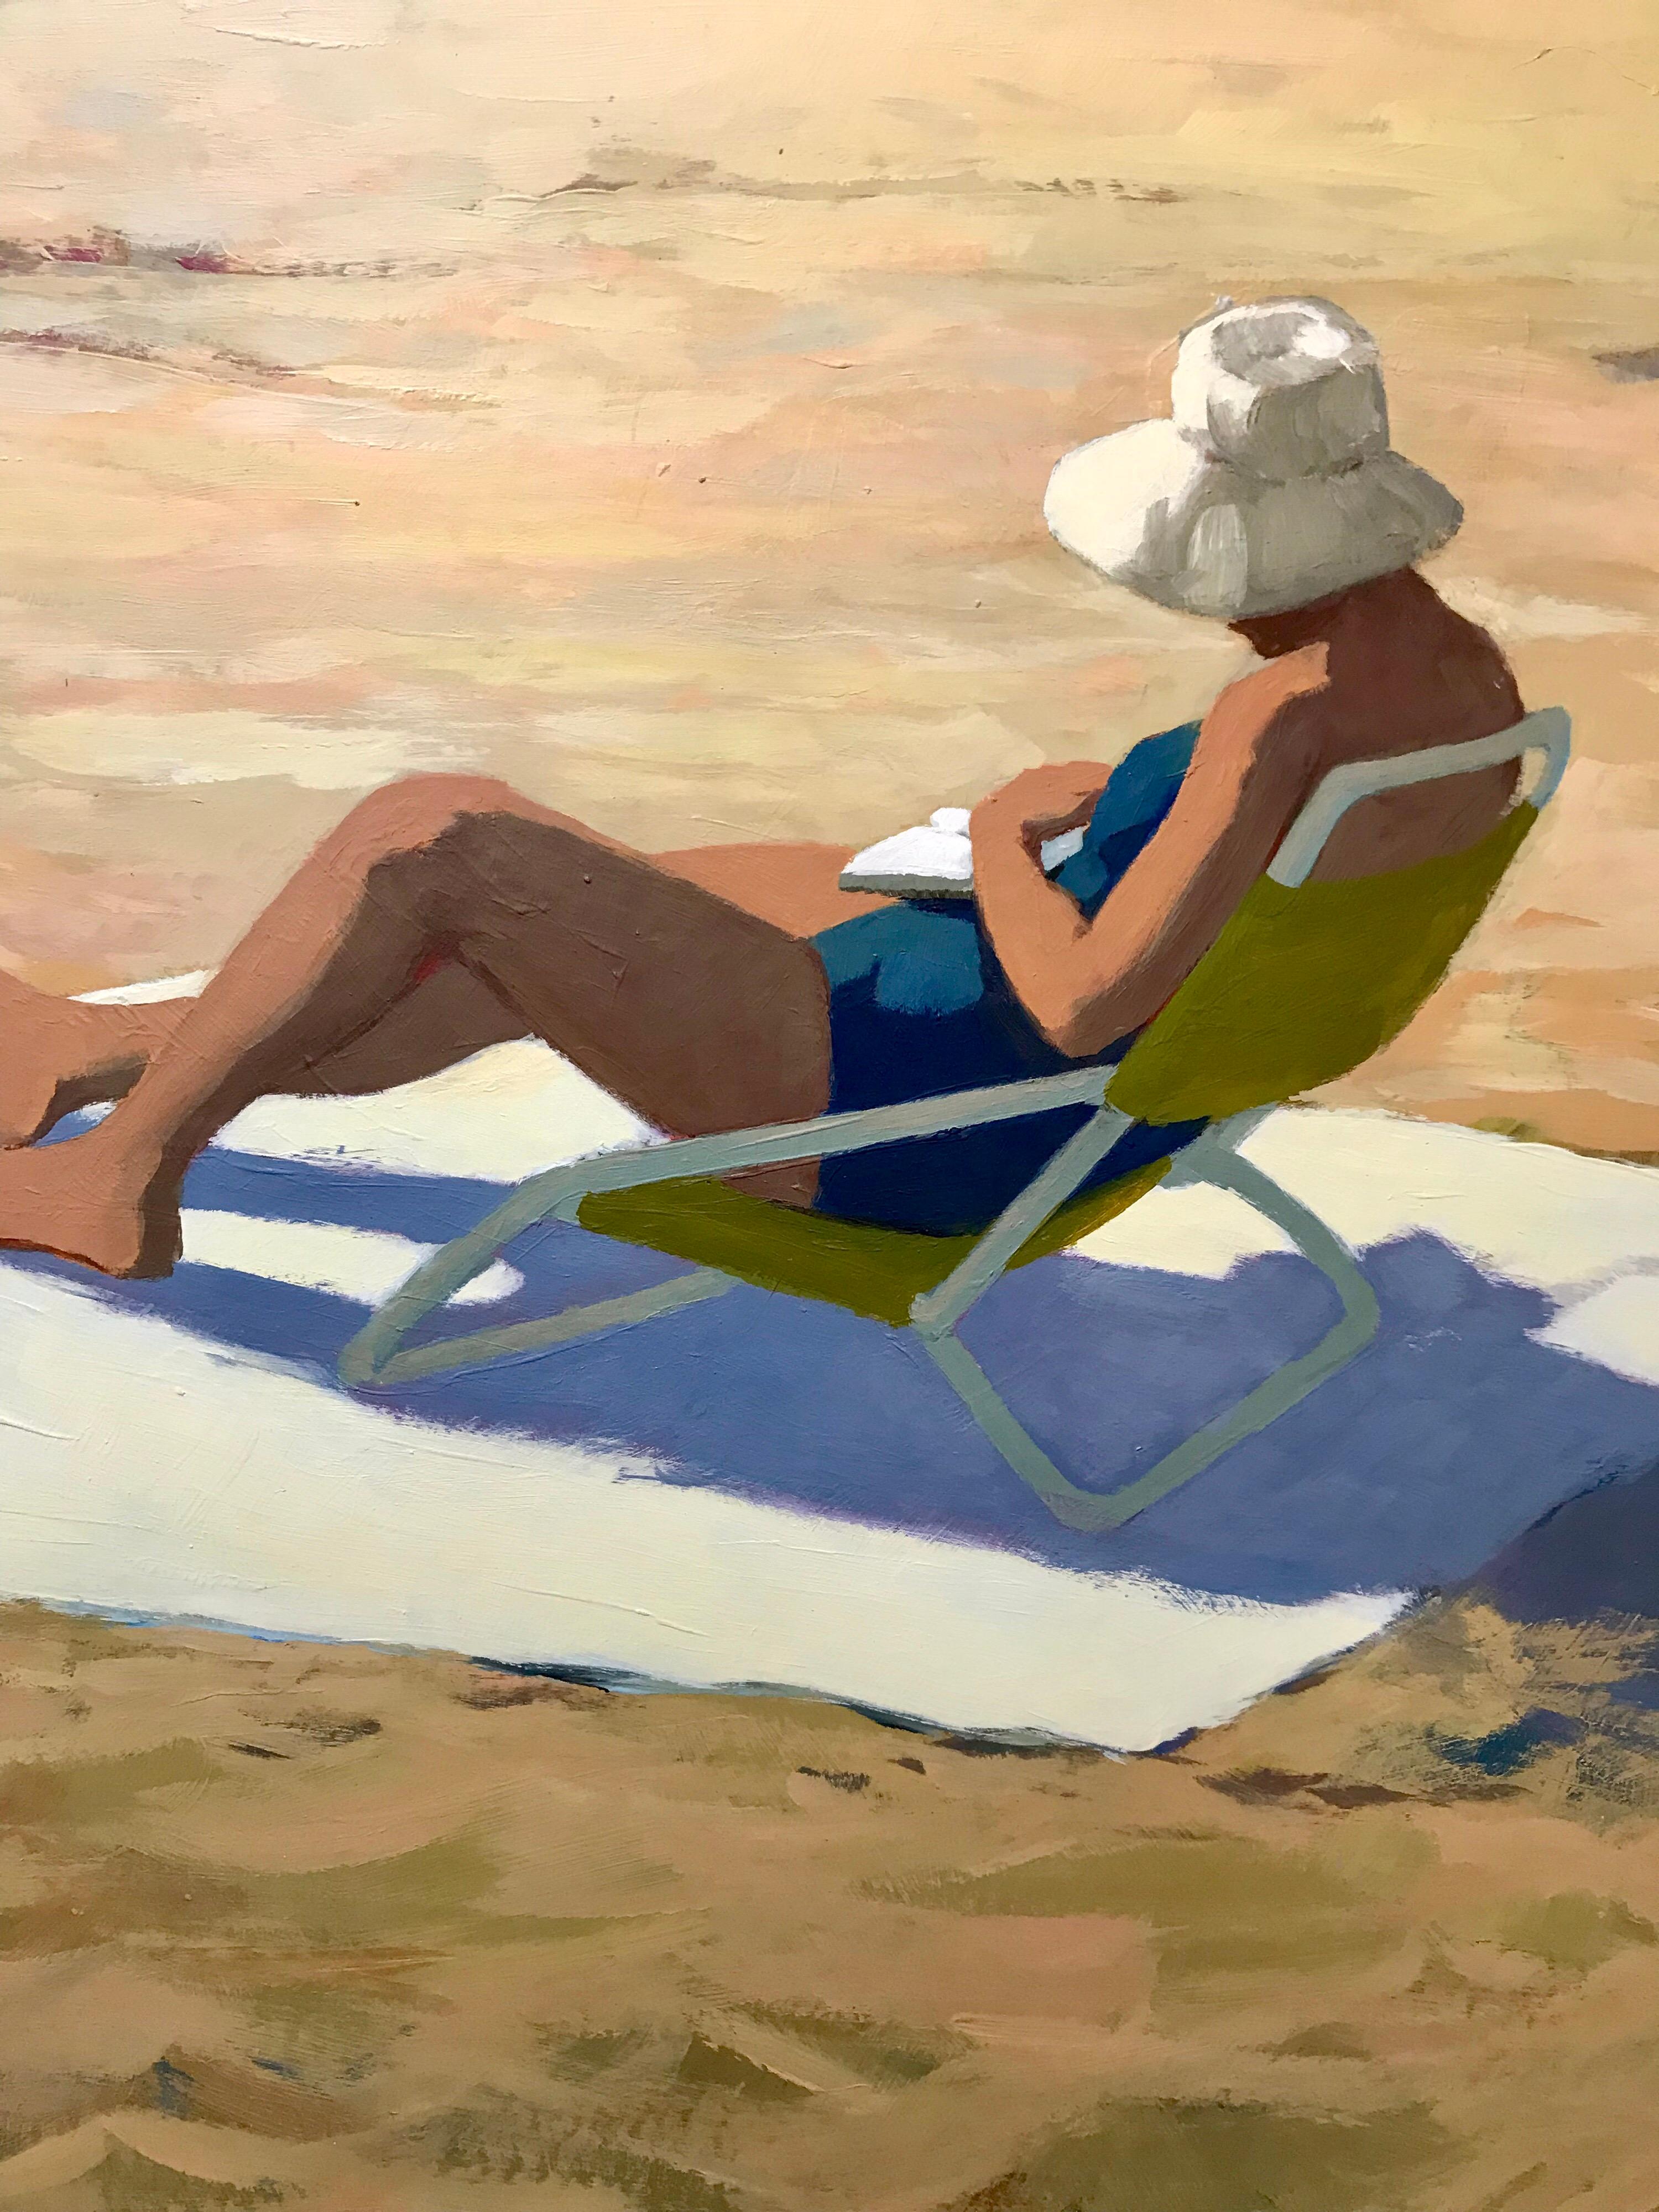 Magnificent 20th century signed Mimi Lesser large oil painting showing a woman on a beach.
The colors are vivid and vibrant. Medium is oil on canvas.